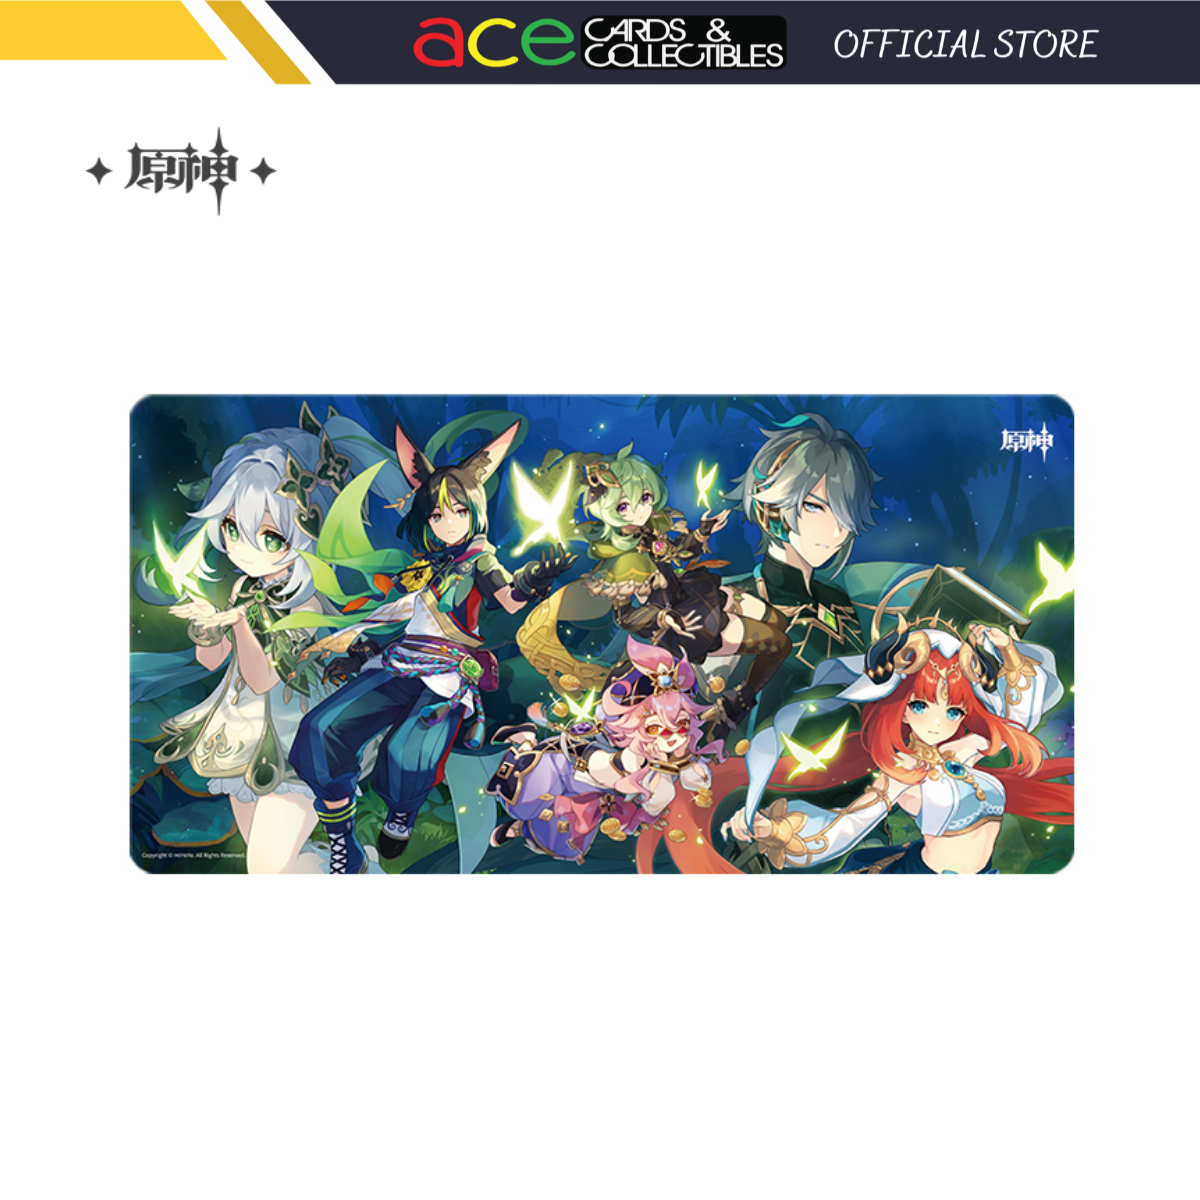 miHoYo Genshin Impact -The Morn a Thousand Roses Brings- Theme Mousepad-miHoYo-Ace Cards & Collectibles